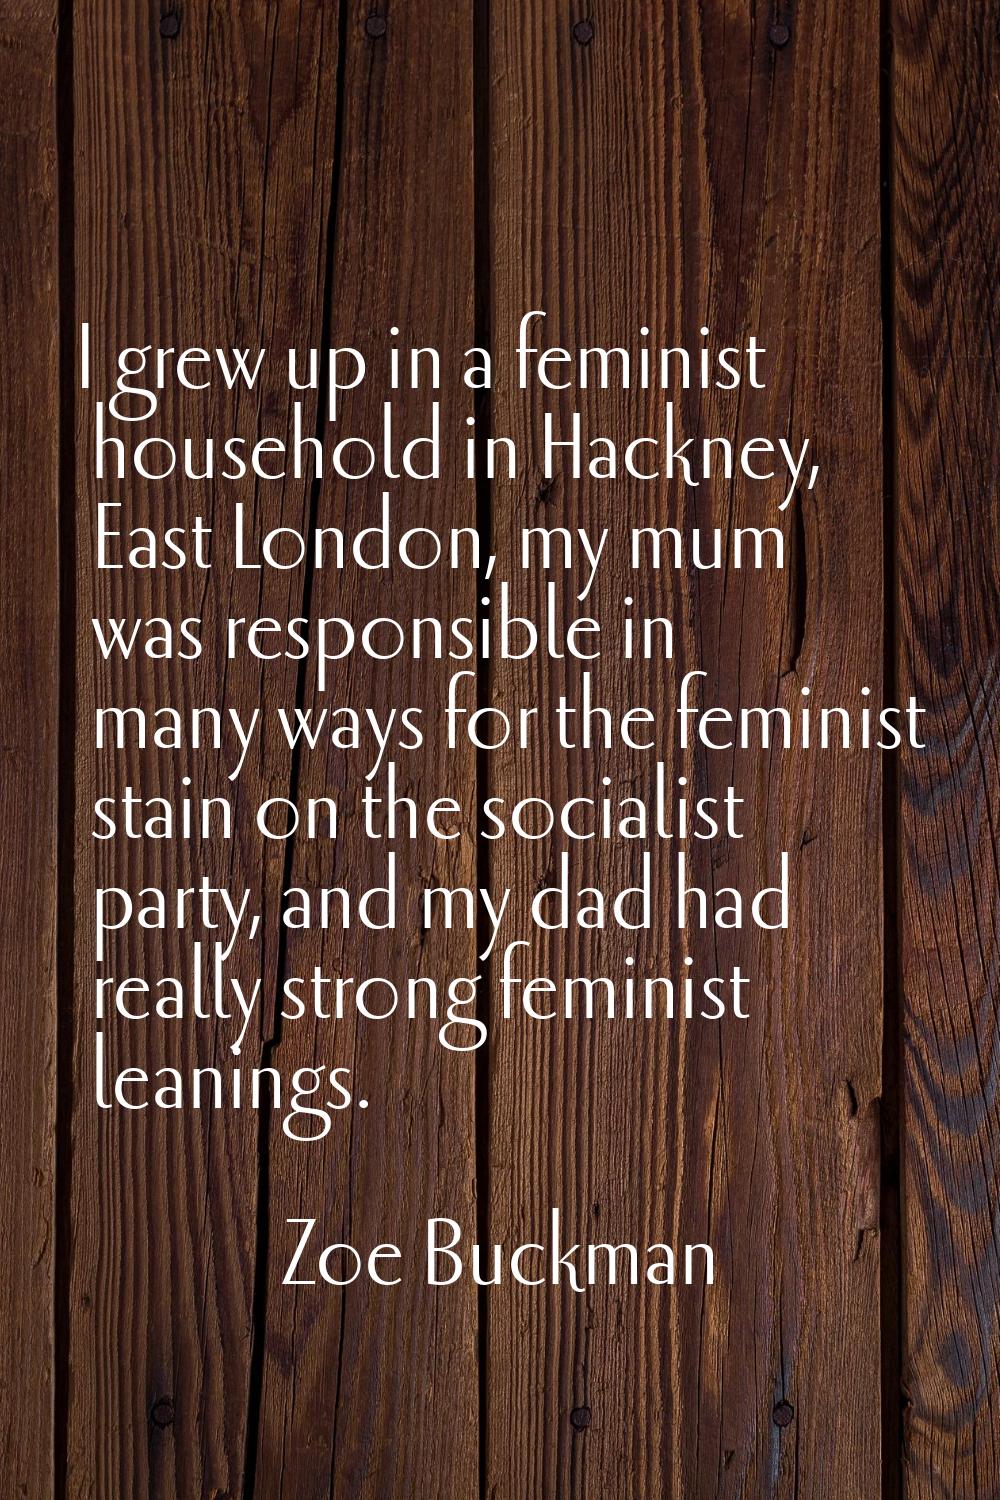 I grew up in a feminist household in Hackney, East London, my mum was responsible in many ways for 